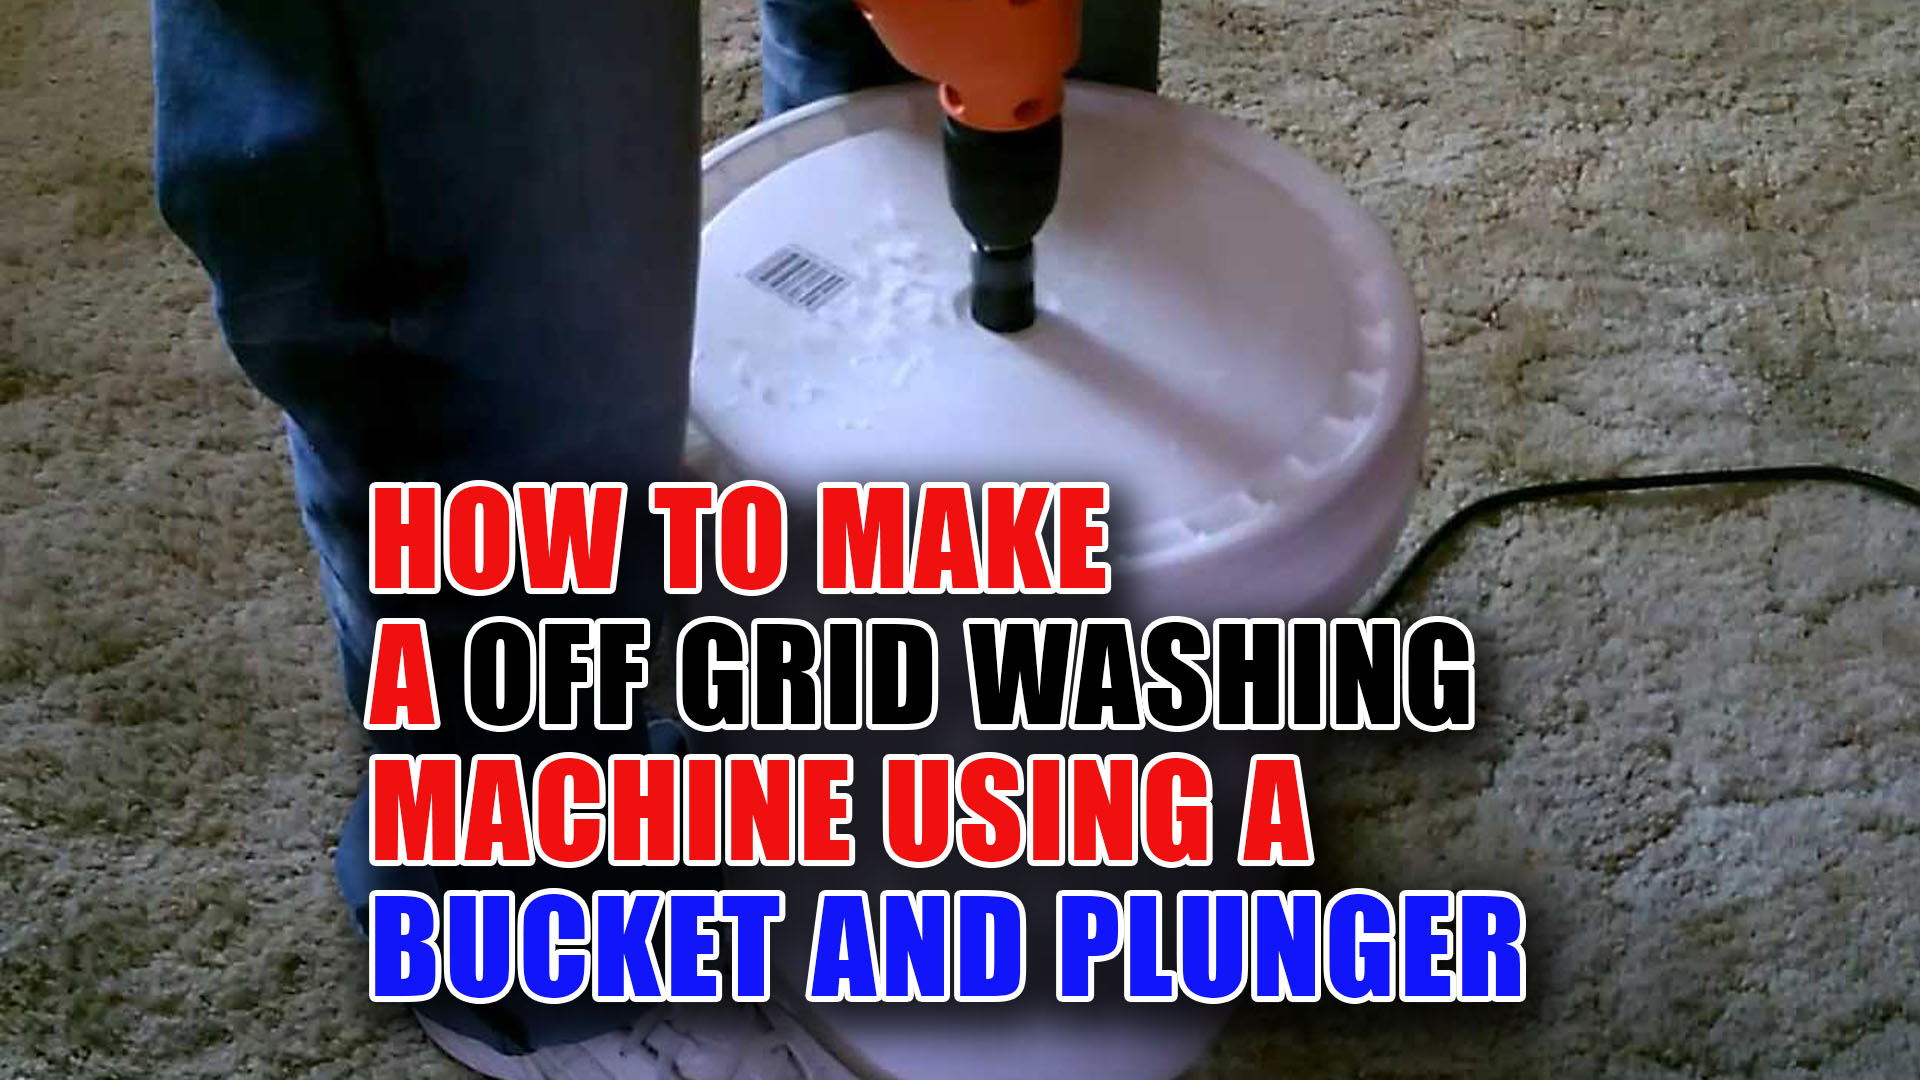 Washing Cloths Off Grid How-to-Make-a-Off-Grid-Washing-Machine-Using-a-Bucket-and-Plunger